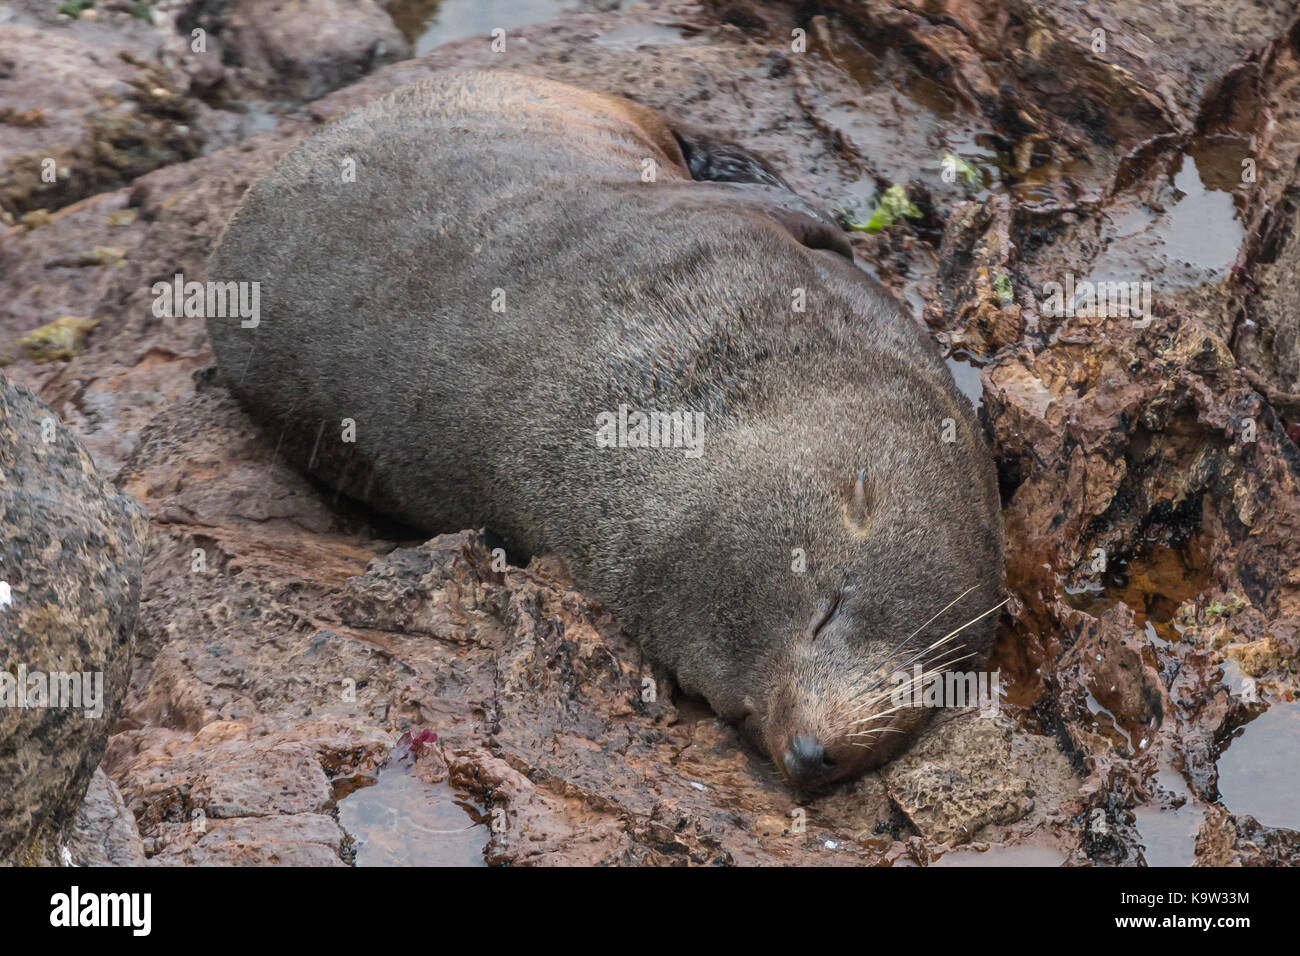 New Zealand fur seal (Arctocephalus forsteri) at a colony in Cape Foulwind, South Island Stock Photo